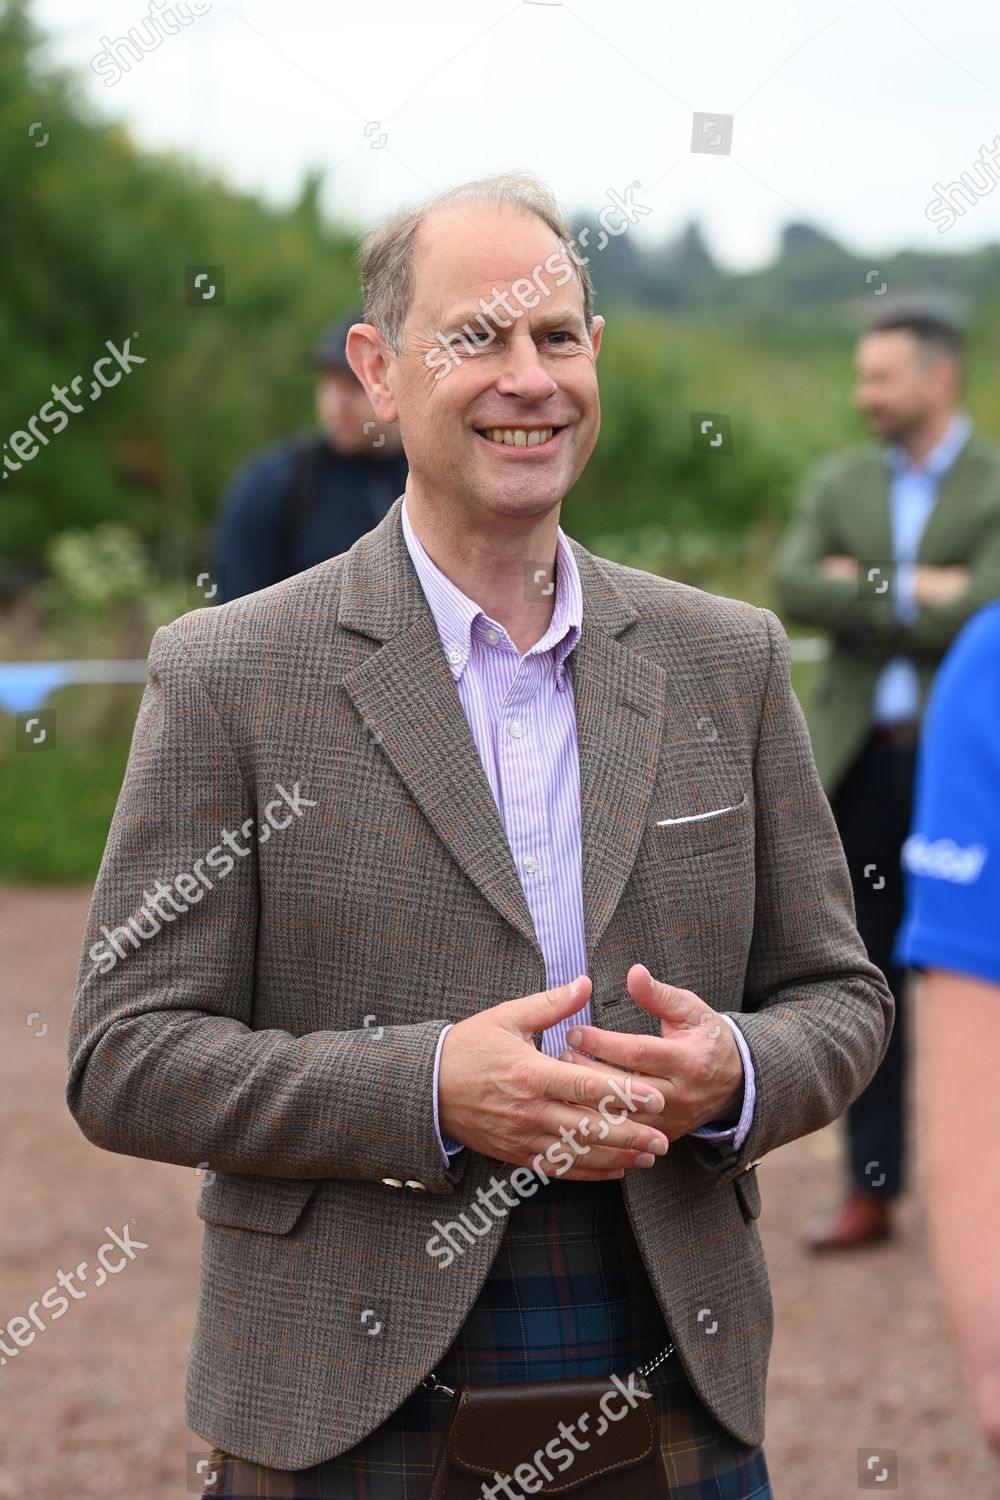 prince-edward-and-sophie-countess-of-wessex-visit-to-forfar-golf-club-scotland-uk-shutterstock-editorial-12172307n.jpg